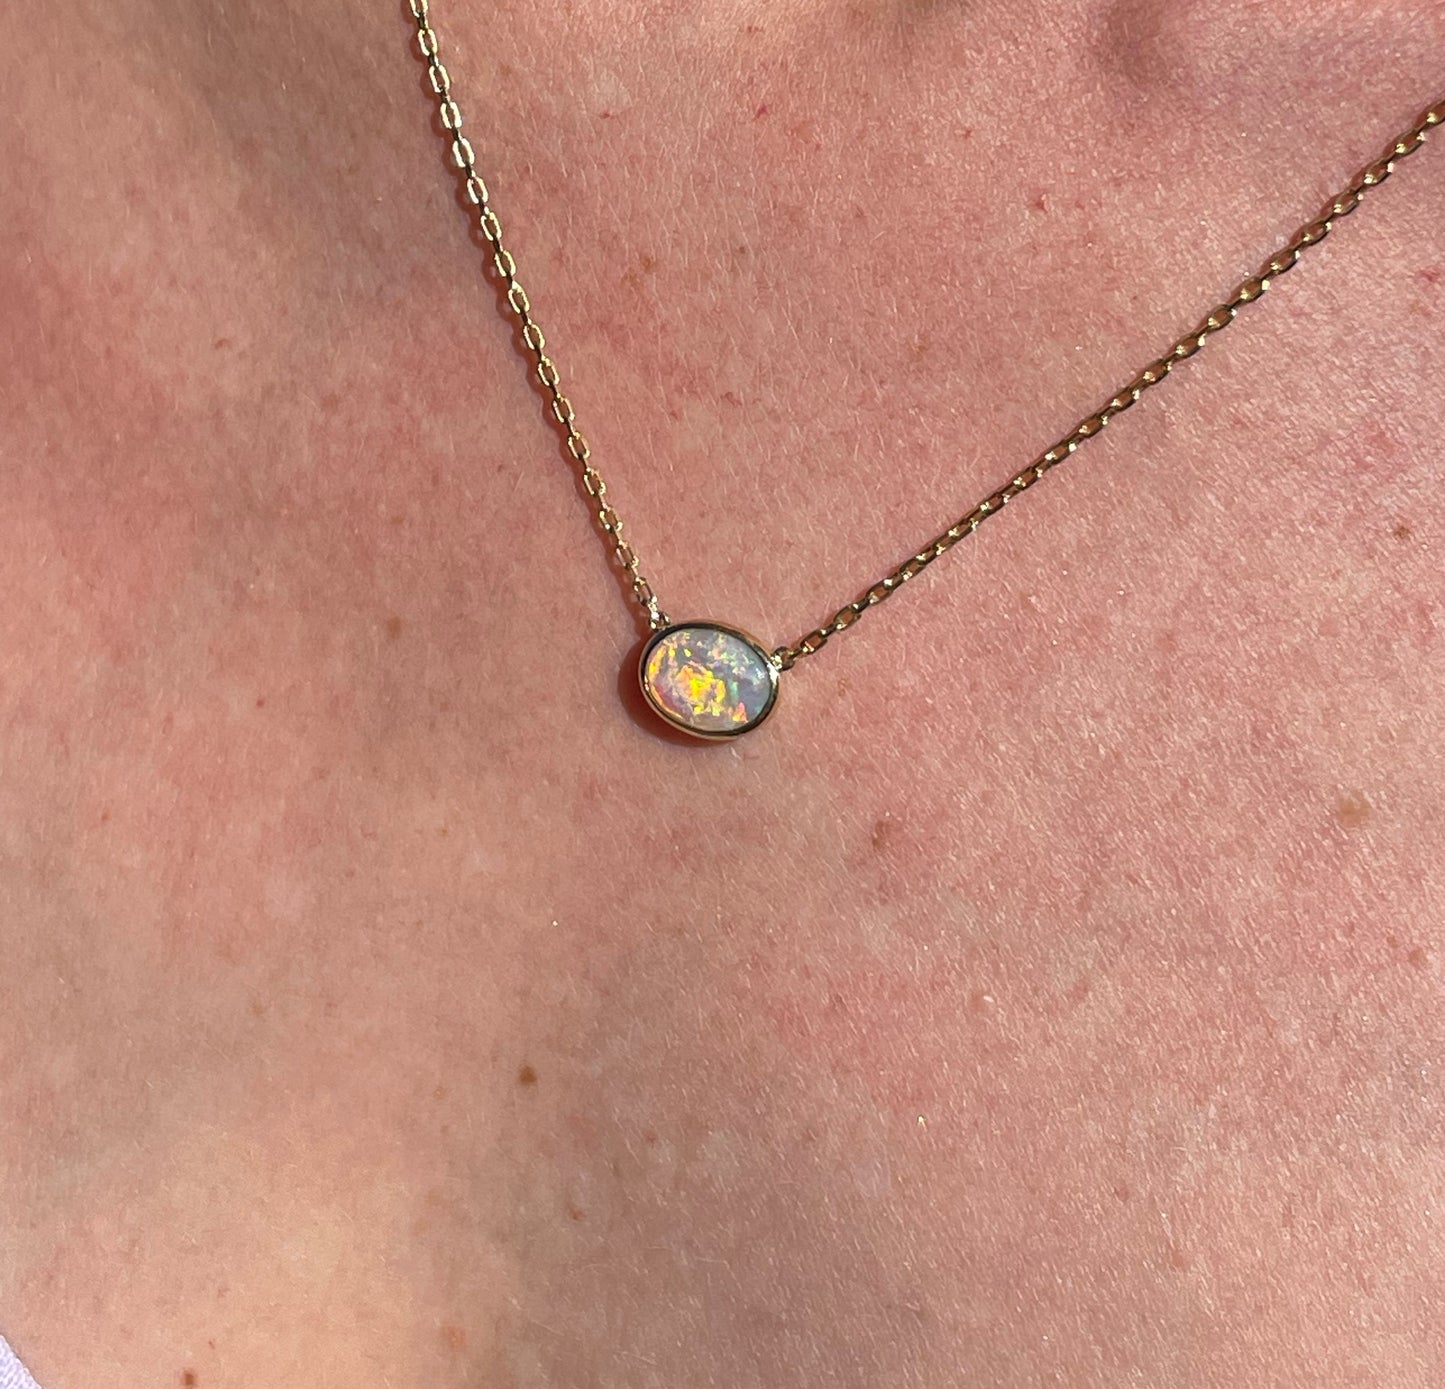 Painted Desert Necklace - 9k gold